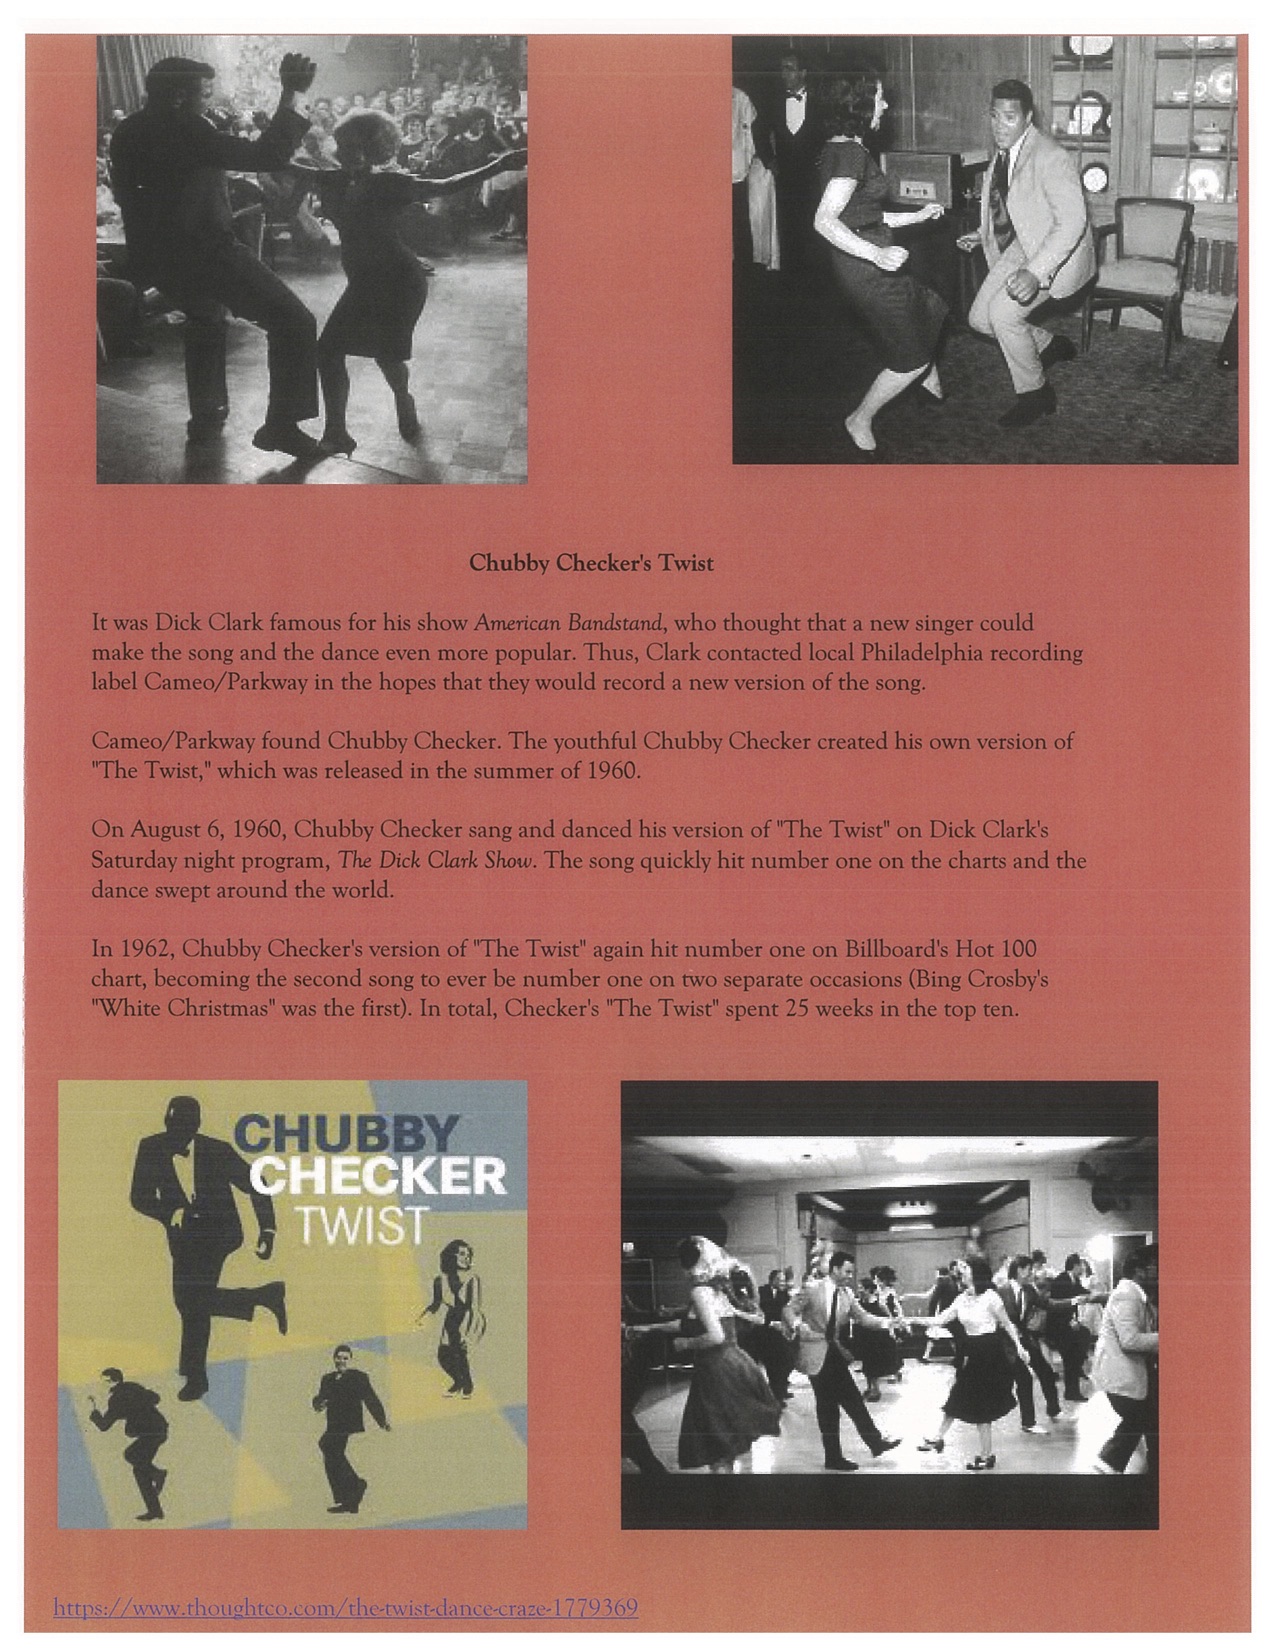 Page 7. The Chubby Checker dance with the performer dancing.